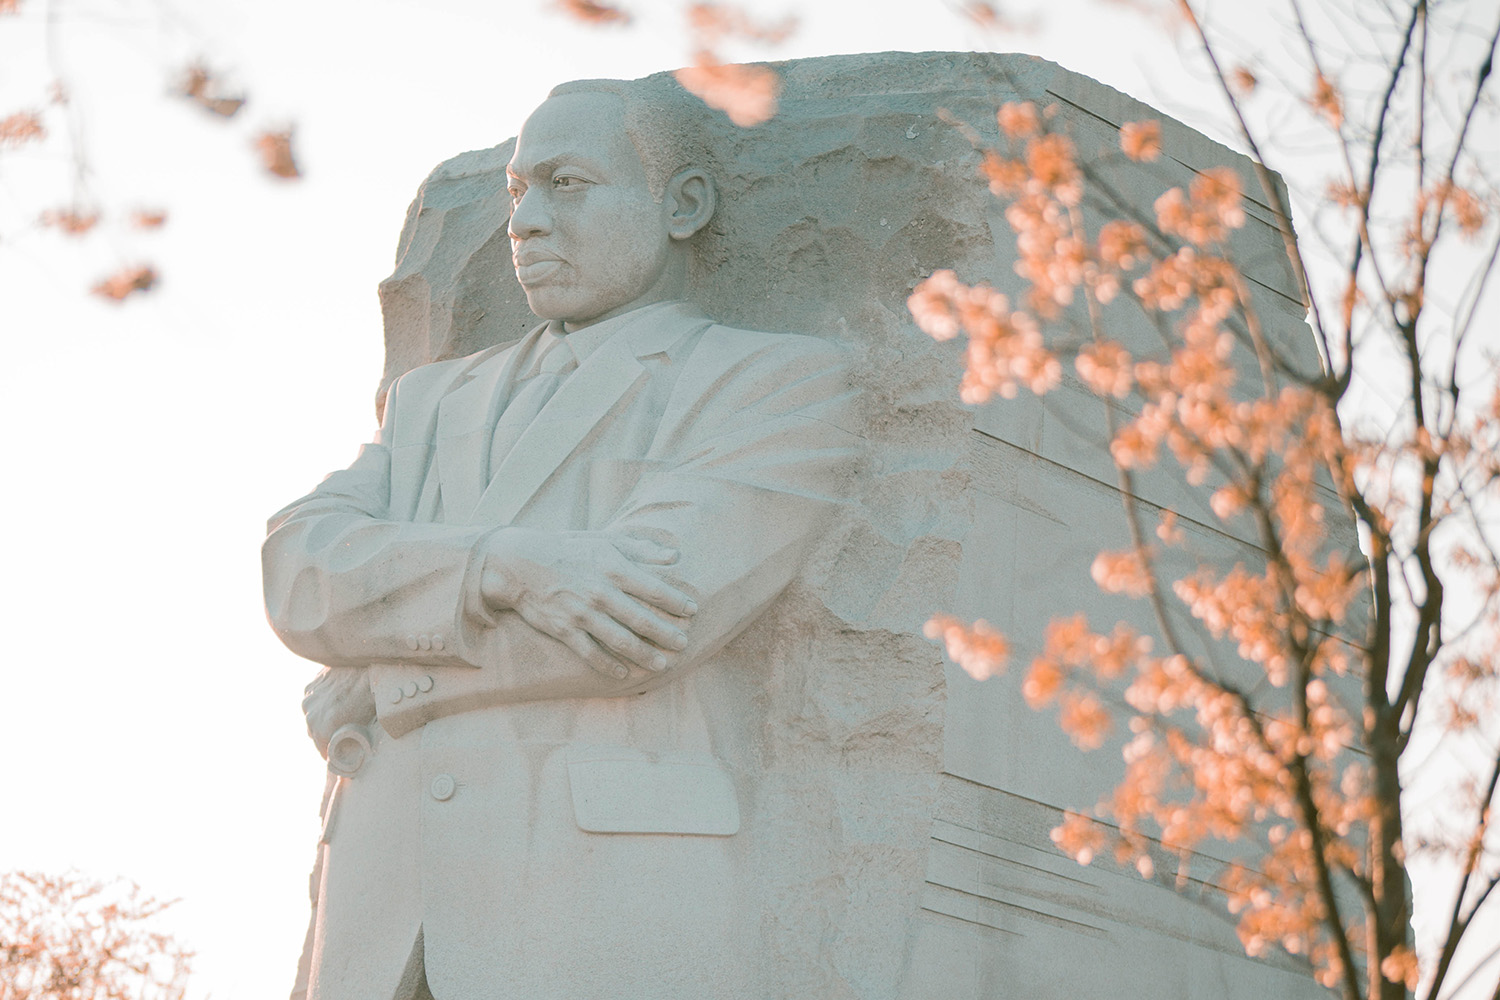 Statue of MLK in Washington DC, with cherry tree in bloom on the right